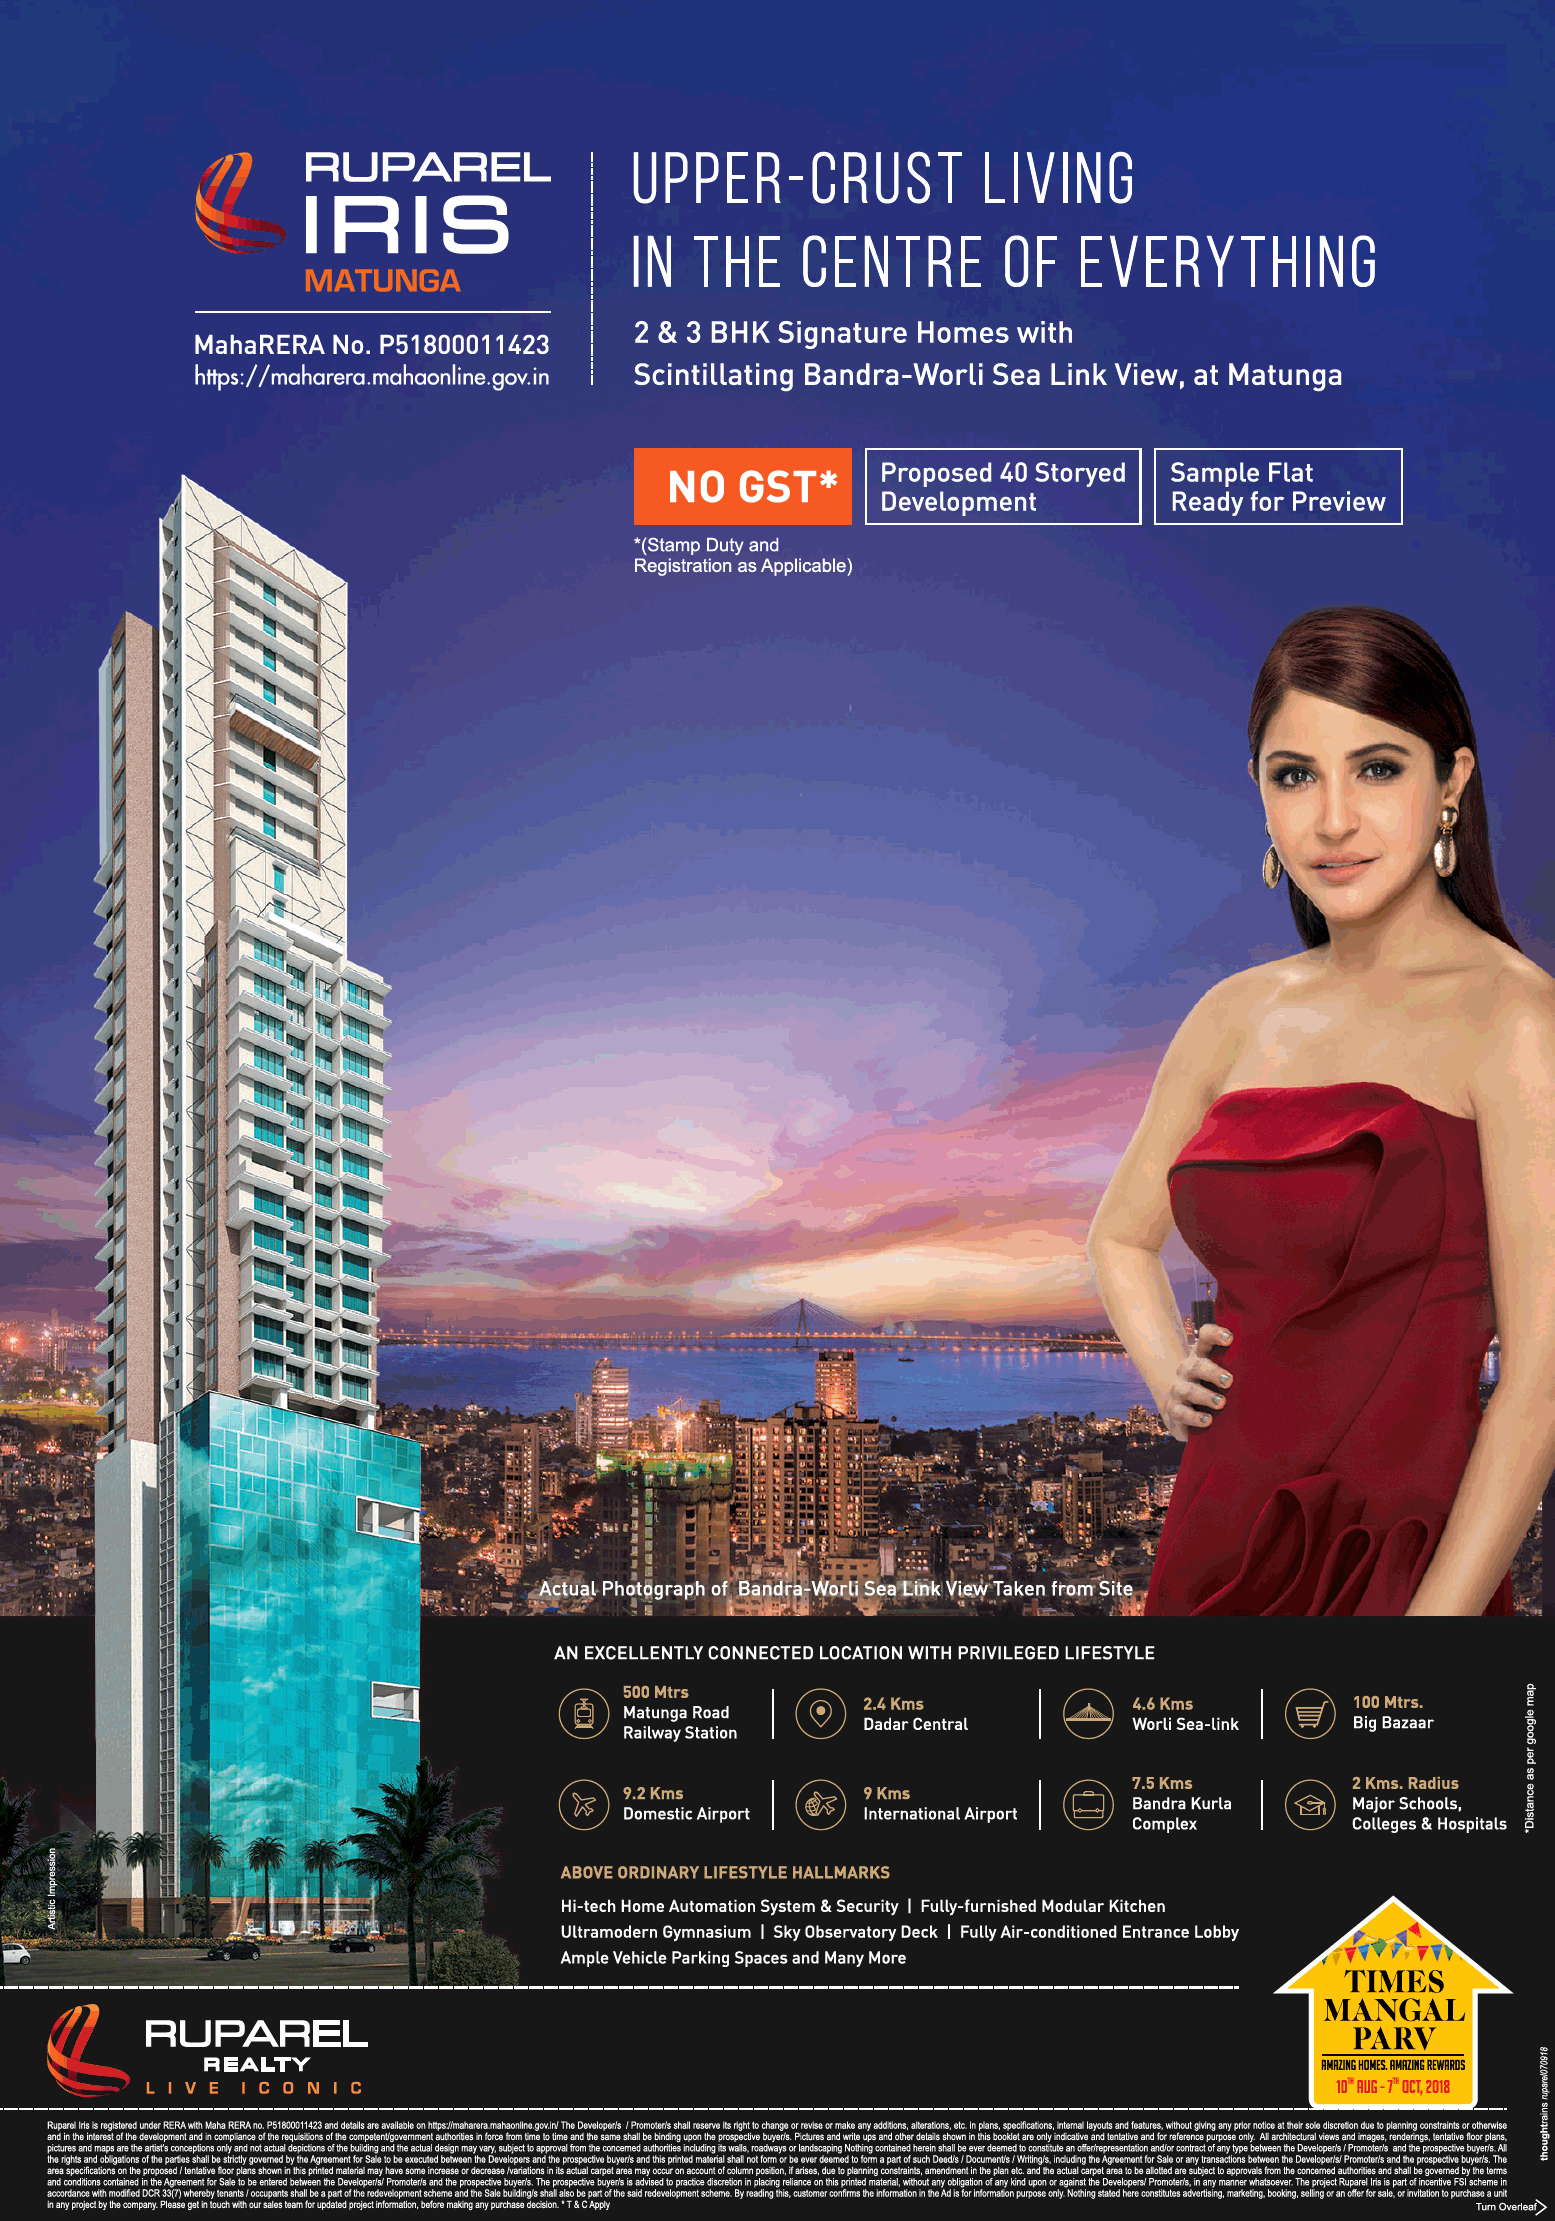 An excellently connected location with privileged lifestyle at Ruparel Iris in Mumbai Update